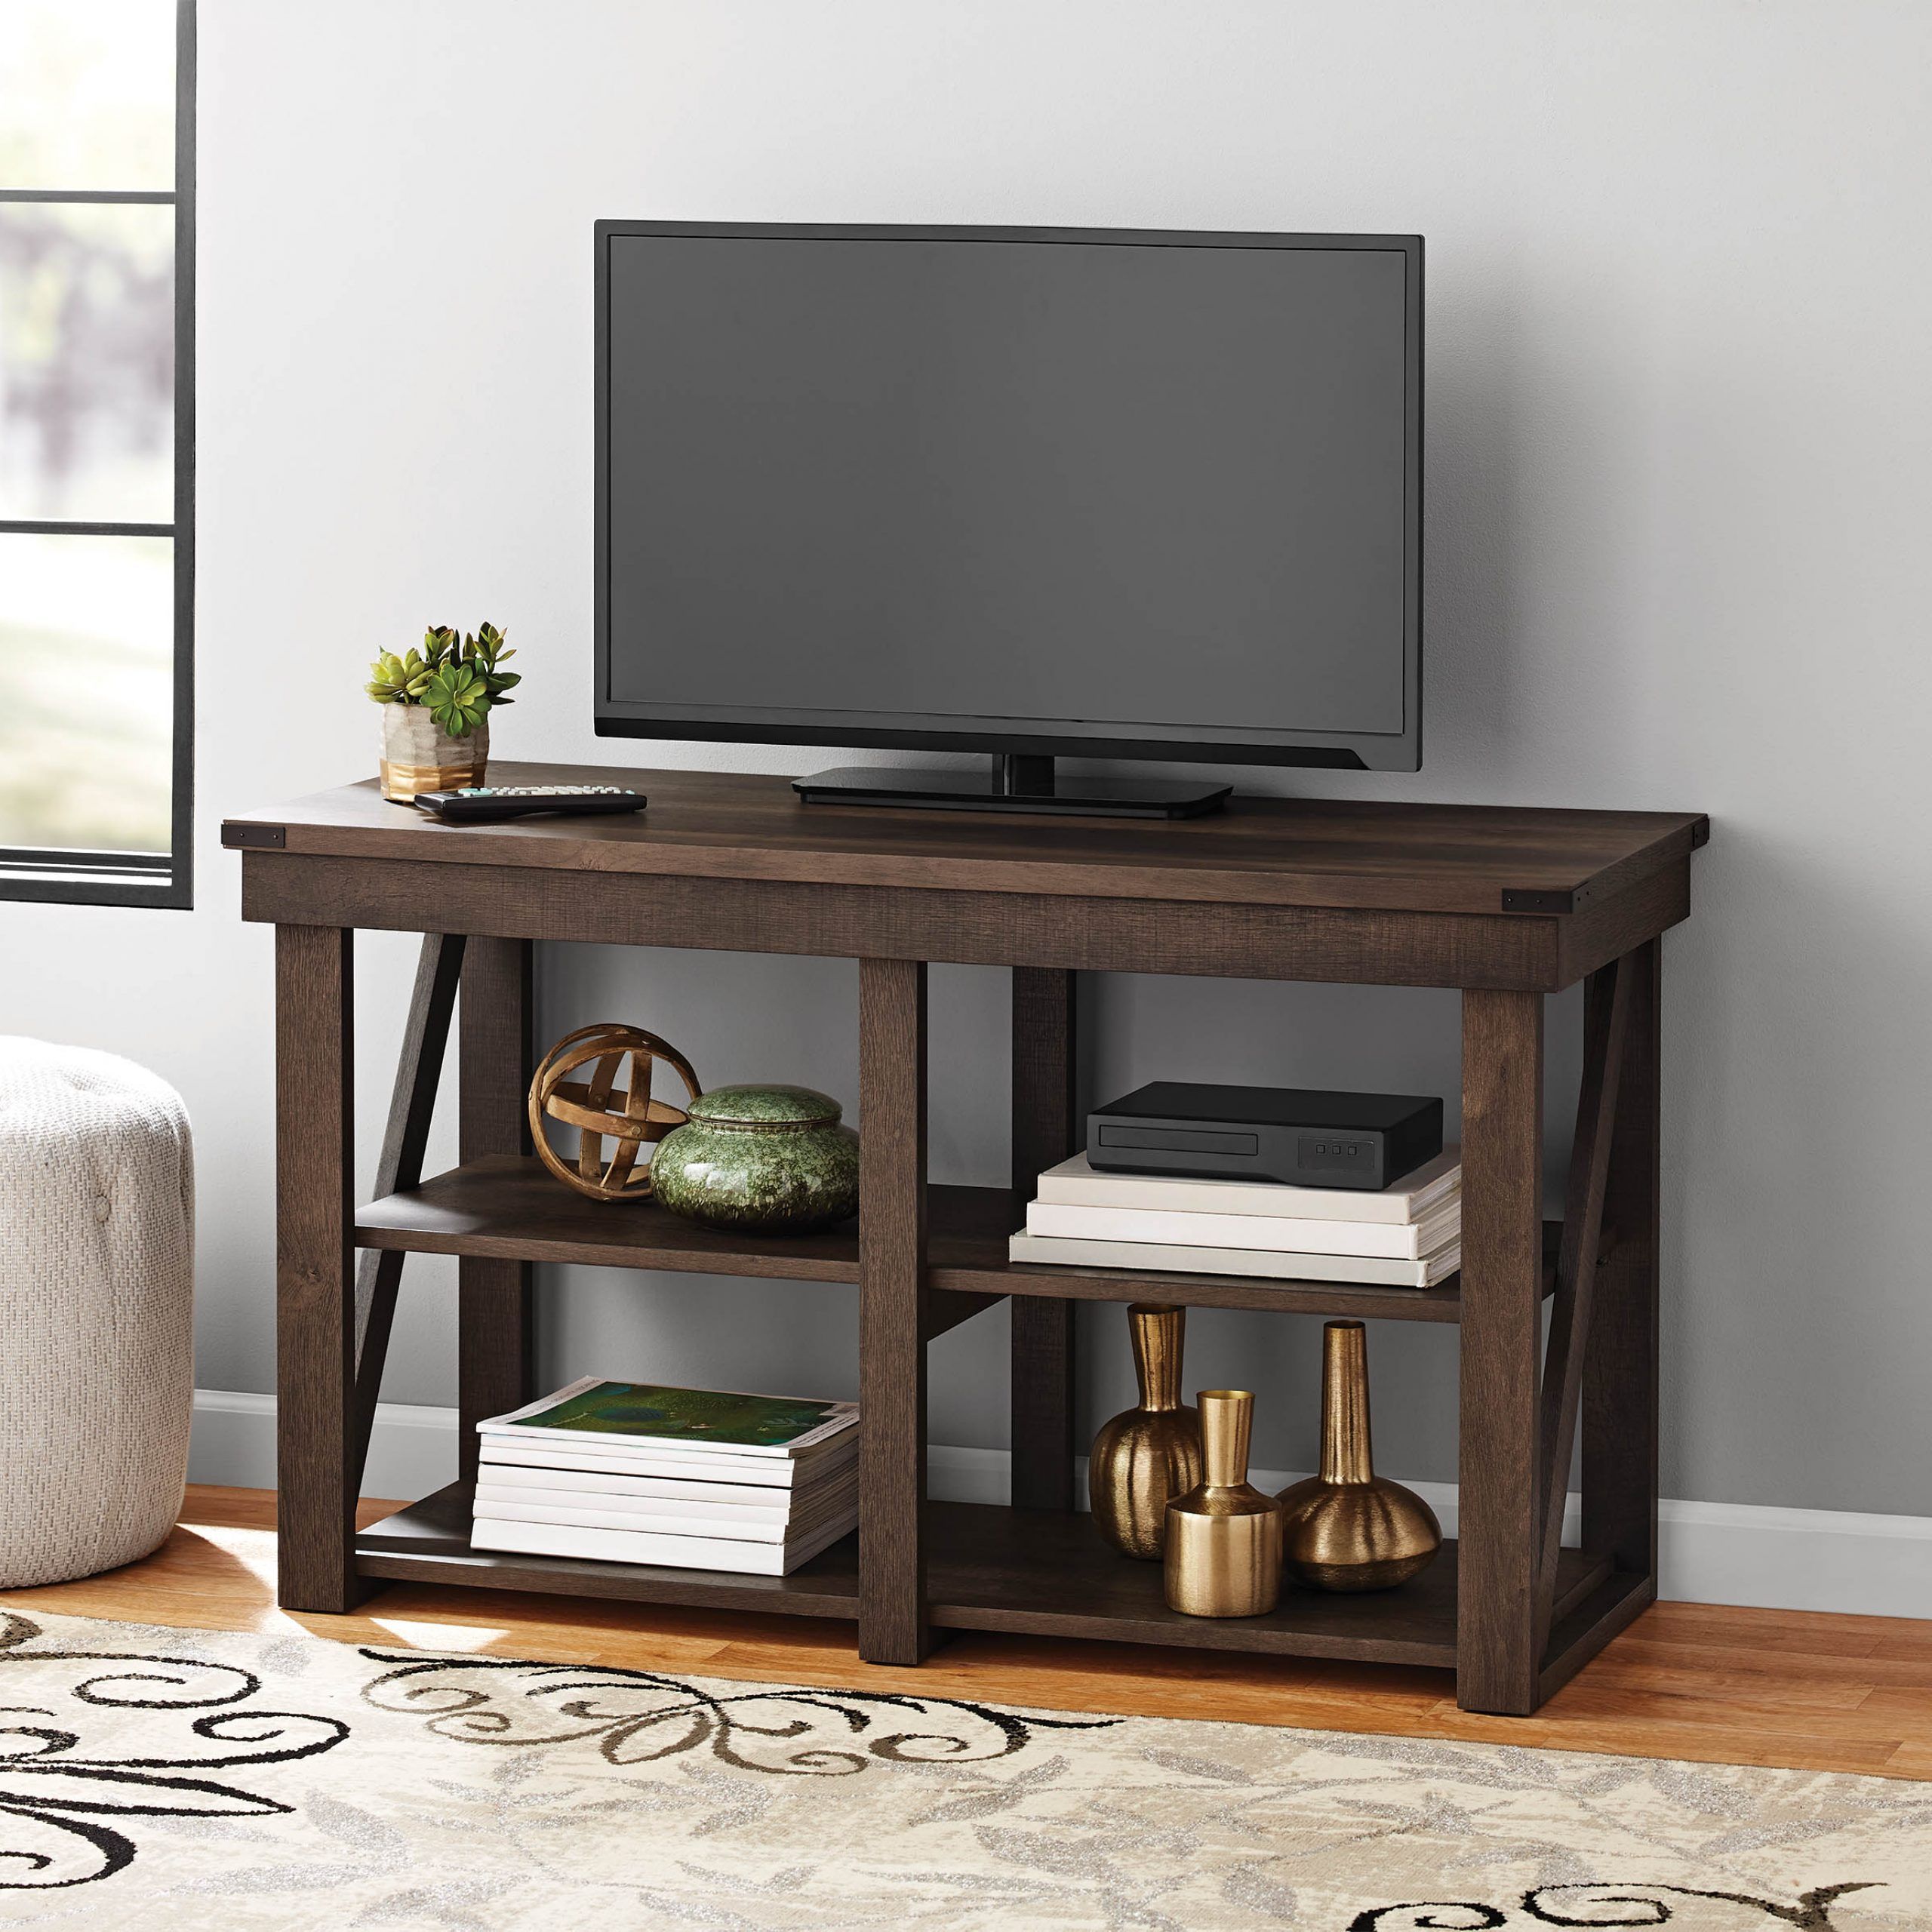 Mainstays Lawson Tv Stand For Tvs Up To 55", Espresso Pertaining To Twila Tv Stands For Tvs Up To 55" (Photo 8 of 15)